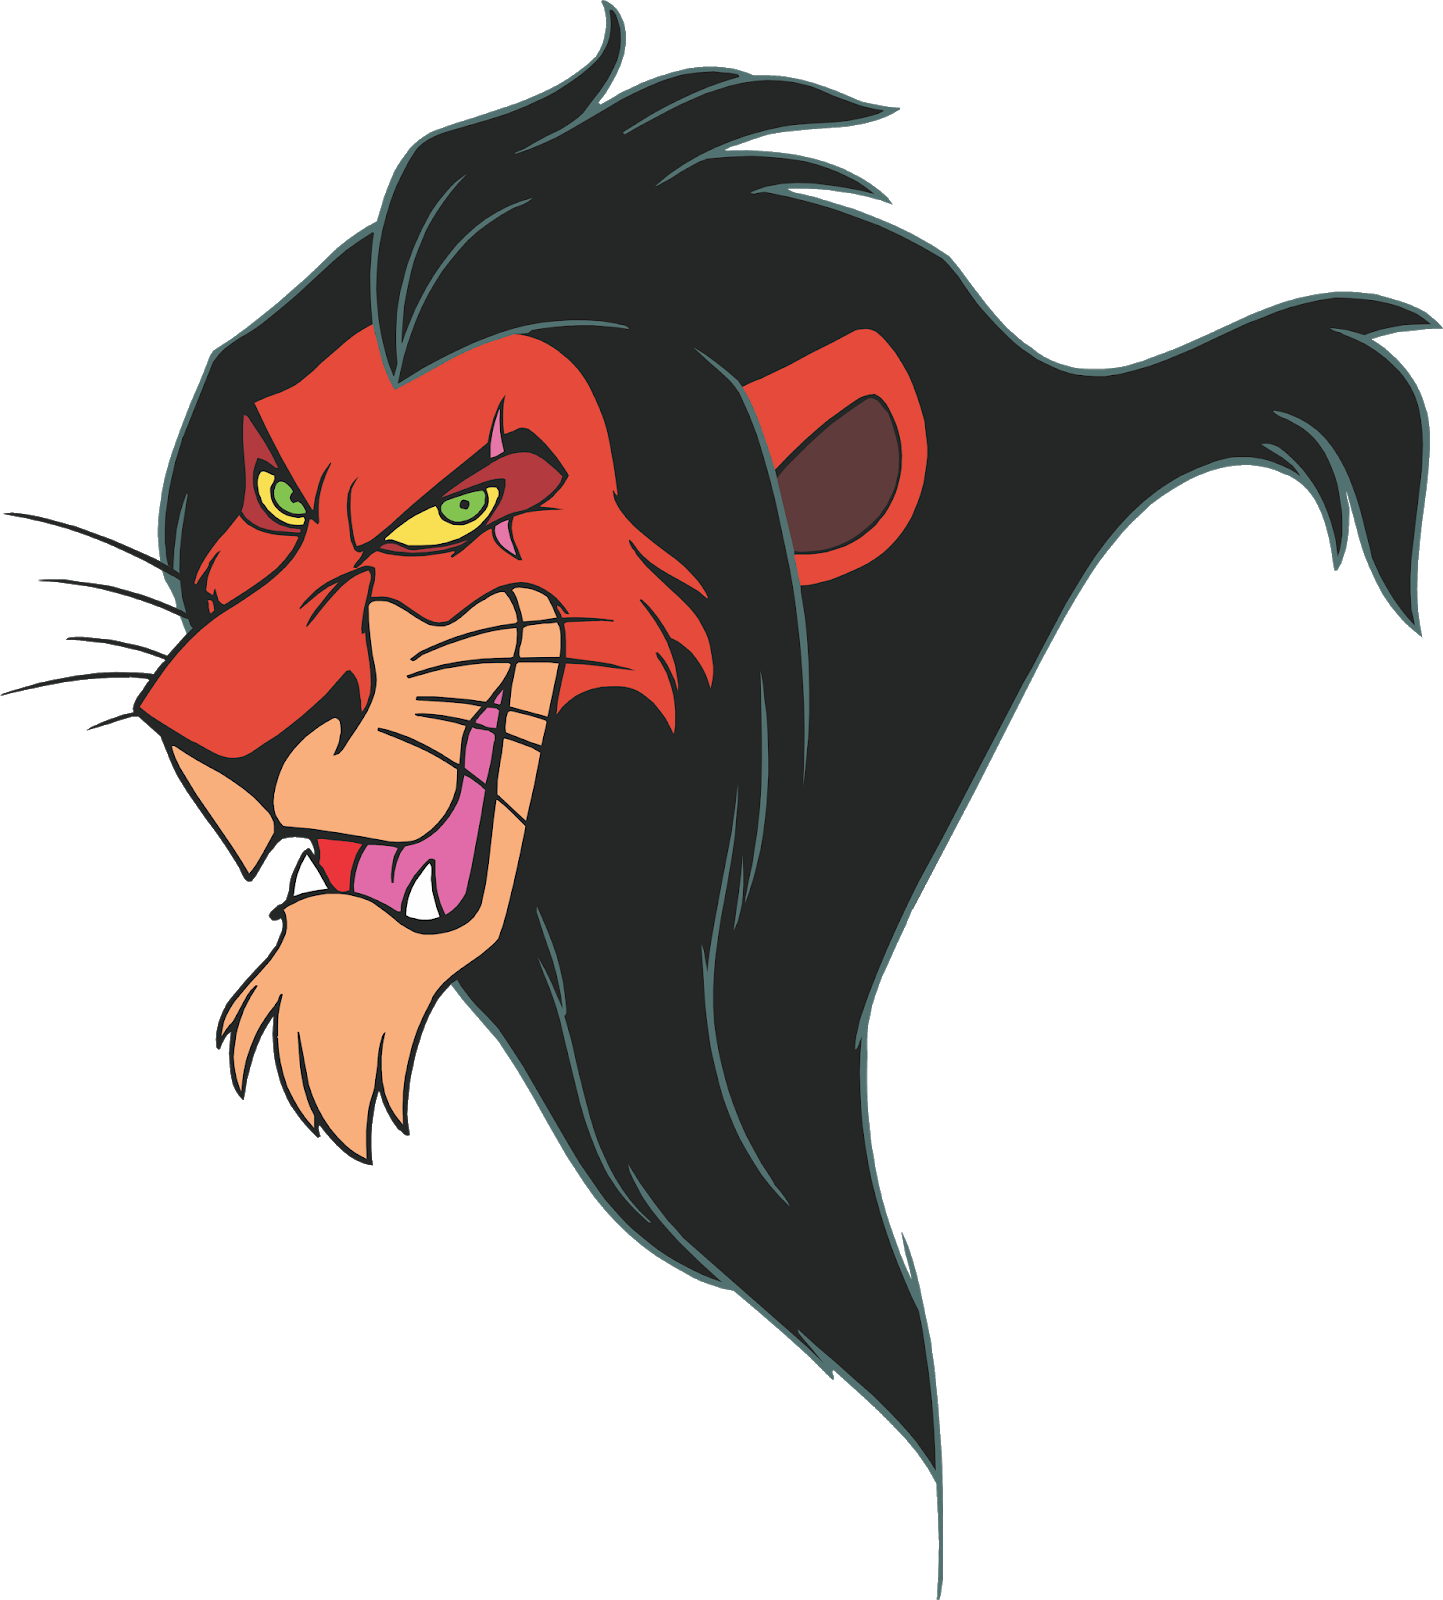 Download Timon And Pumbaa Cartoon Character, Timon And Pumbaa - Scar Lion  King Mane PNG Image with No Background 